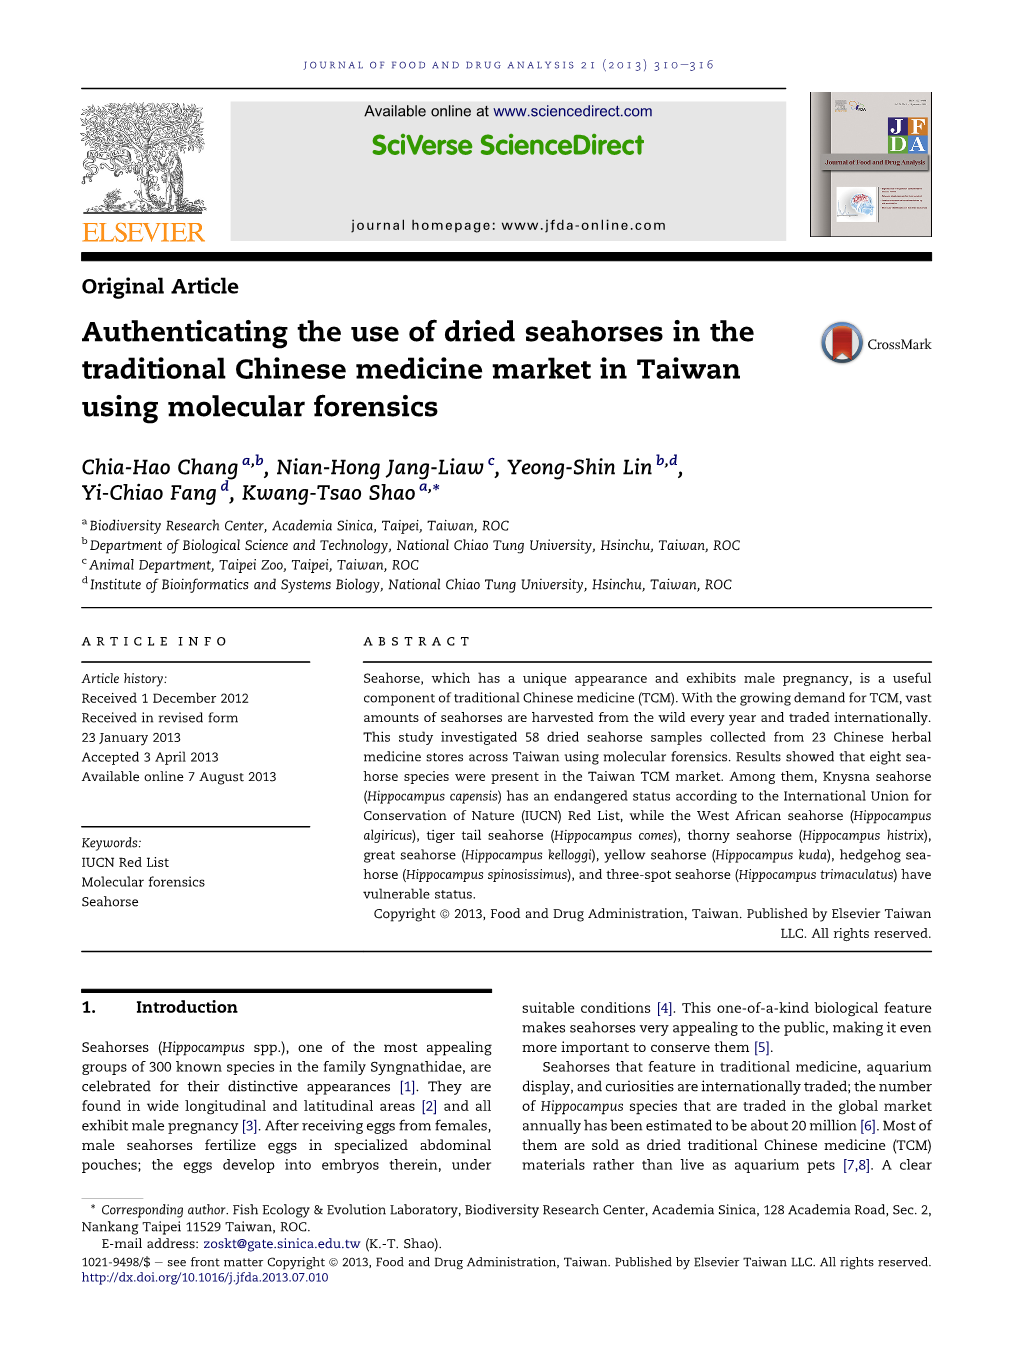 Authenticating the Use of Dried Seahorses in the Traditional Chinese Medicine Market in Taiwan Using Molecular Forensics